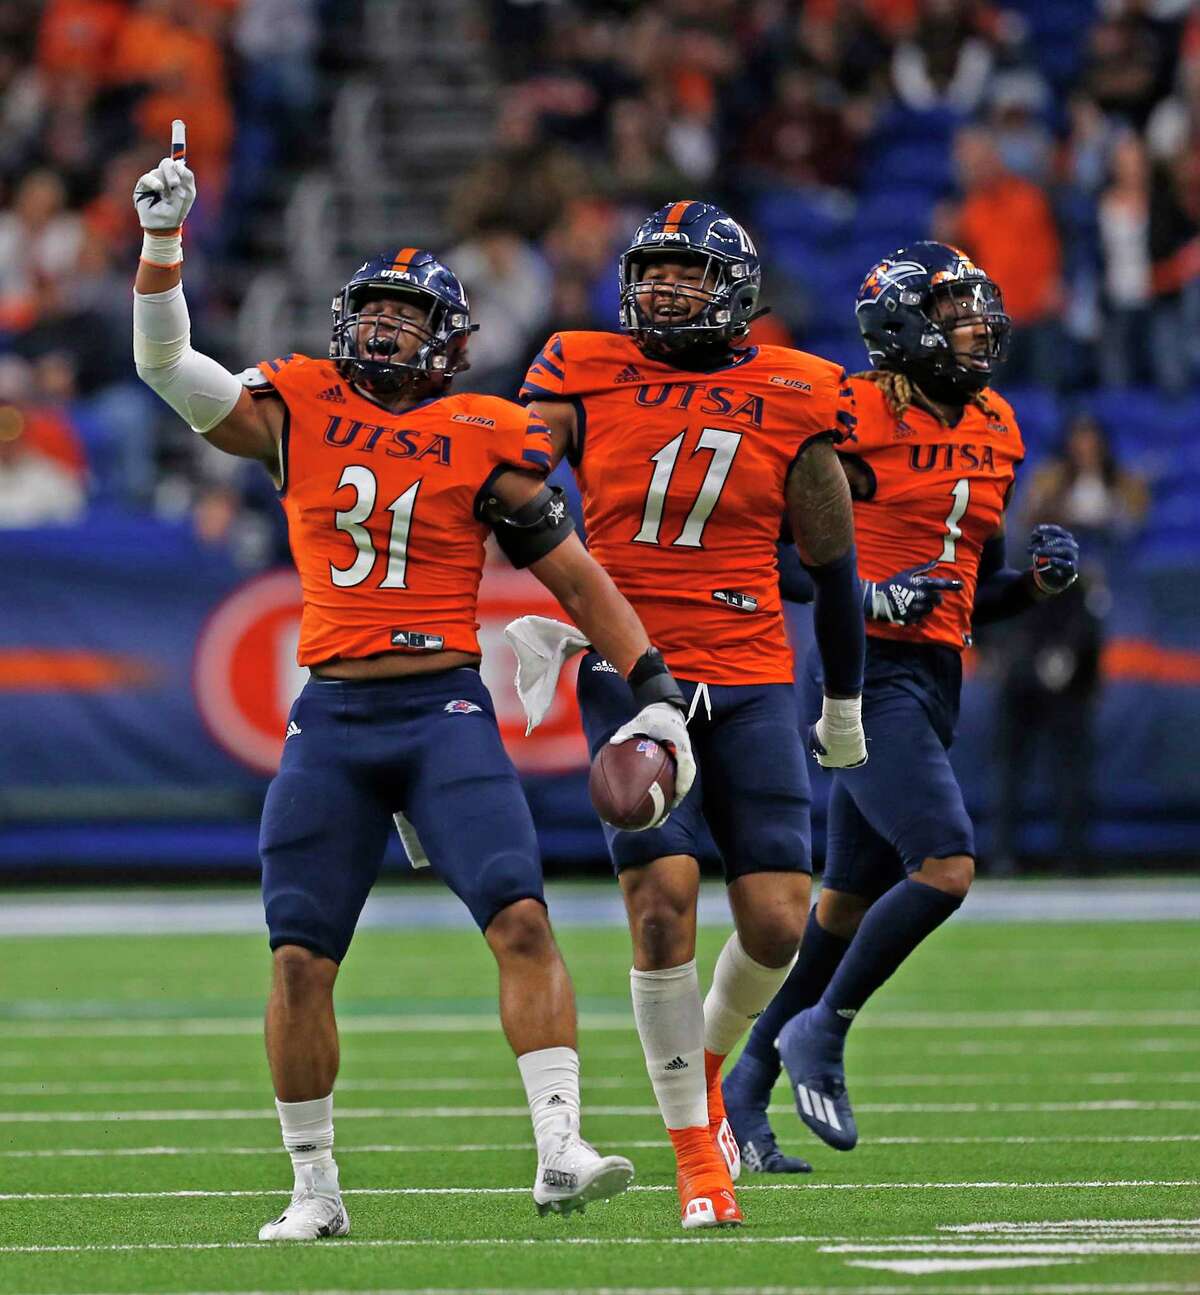 SAN ANTONIO, TX - NOVEMBER 12: Linebacker Trey Moore #31 of the UTSA Roadrunners celebrates after stripping the ball from Landry Lyddy #18 of the Louisiana Tech Bulldogs (not in frame) in the second half at Alamodome on November 12, 2022 in San Antonio, Texas. (Photo by Ronald Cortes/Getty Images)